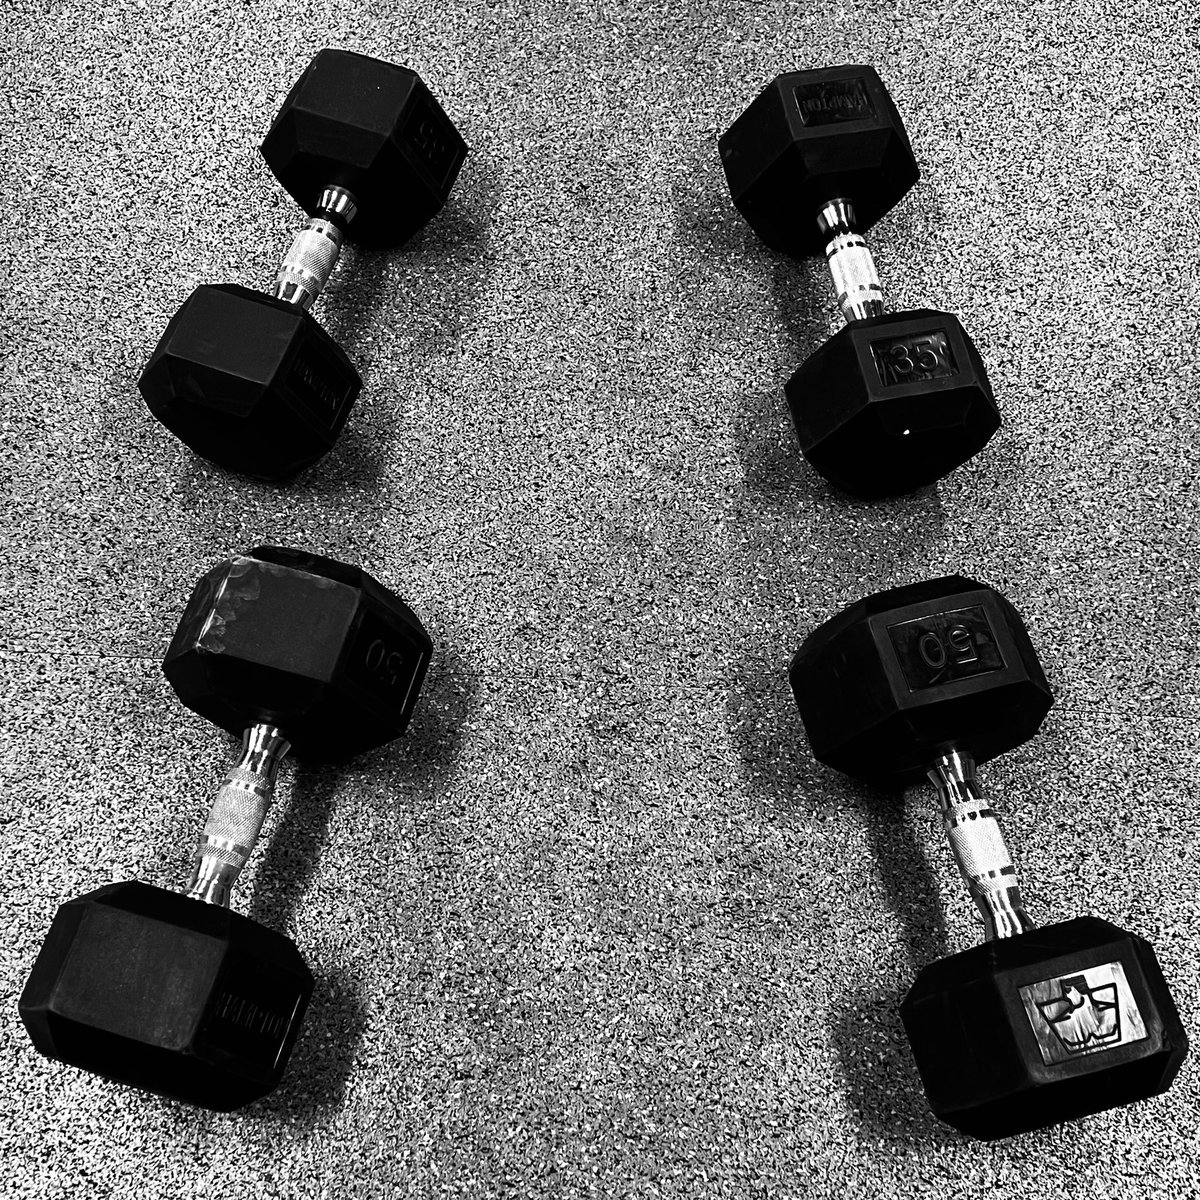 Aftermath. 
Dumbbell domination.